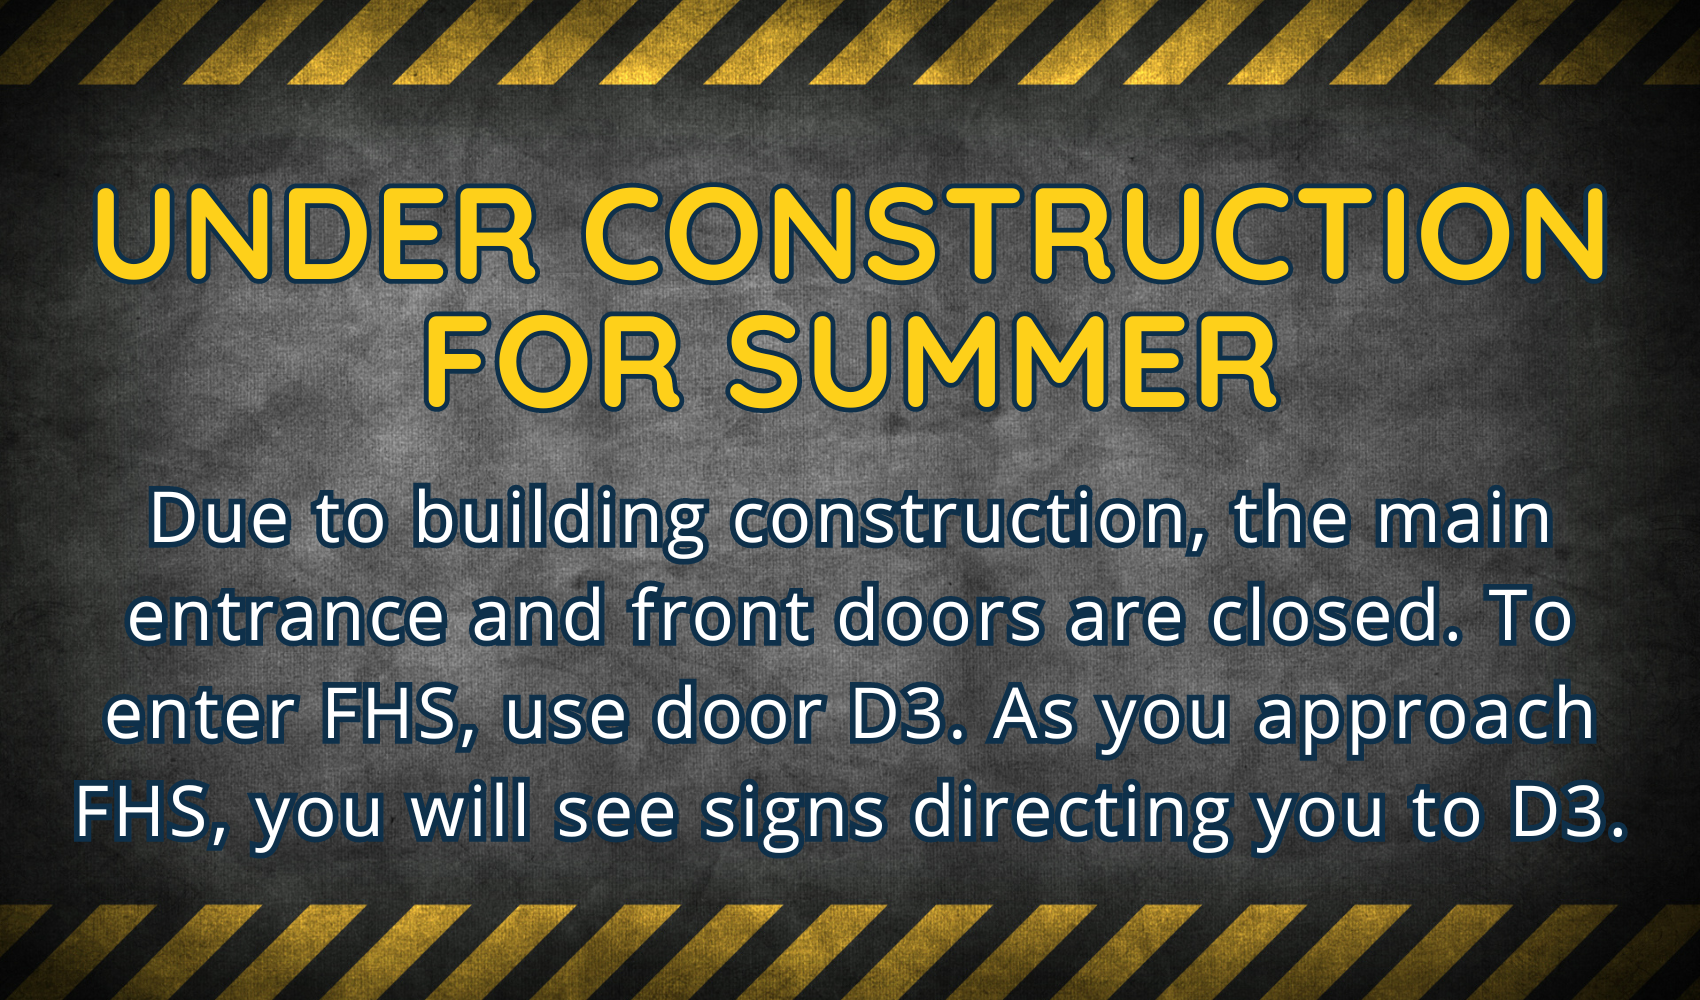 Under Construction for Summer- Use D3